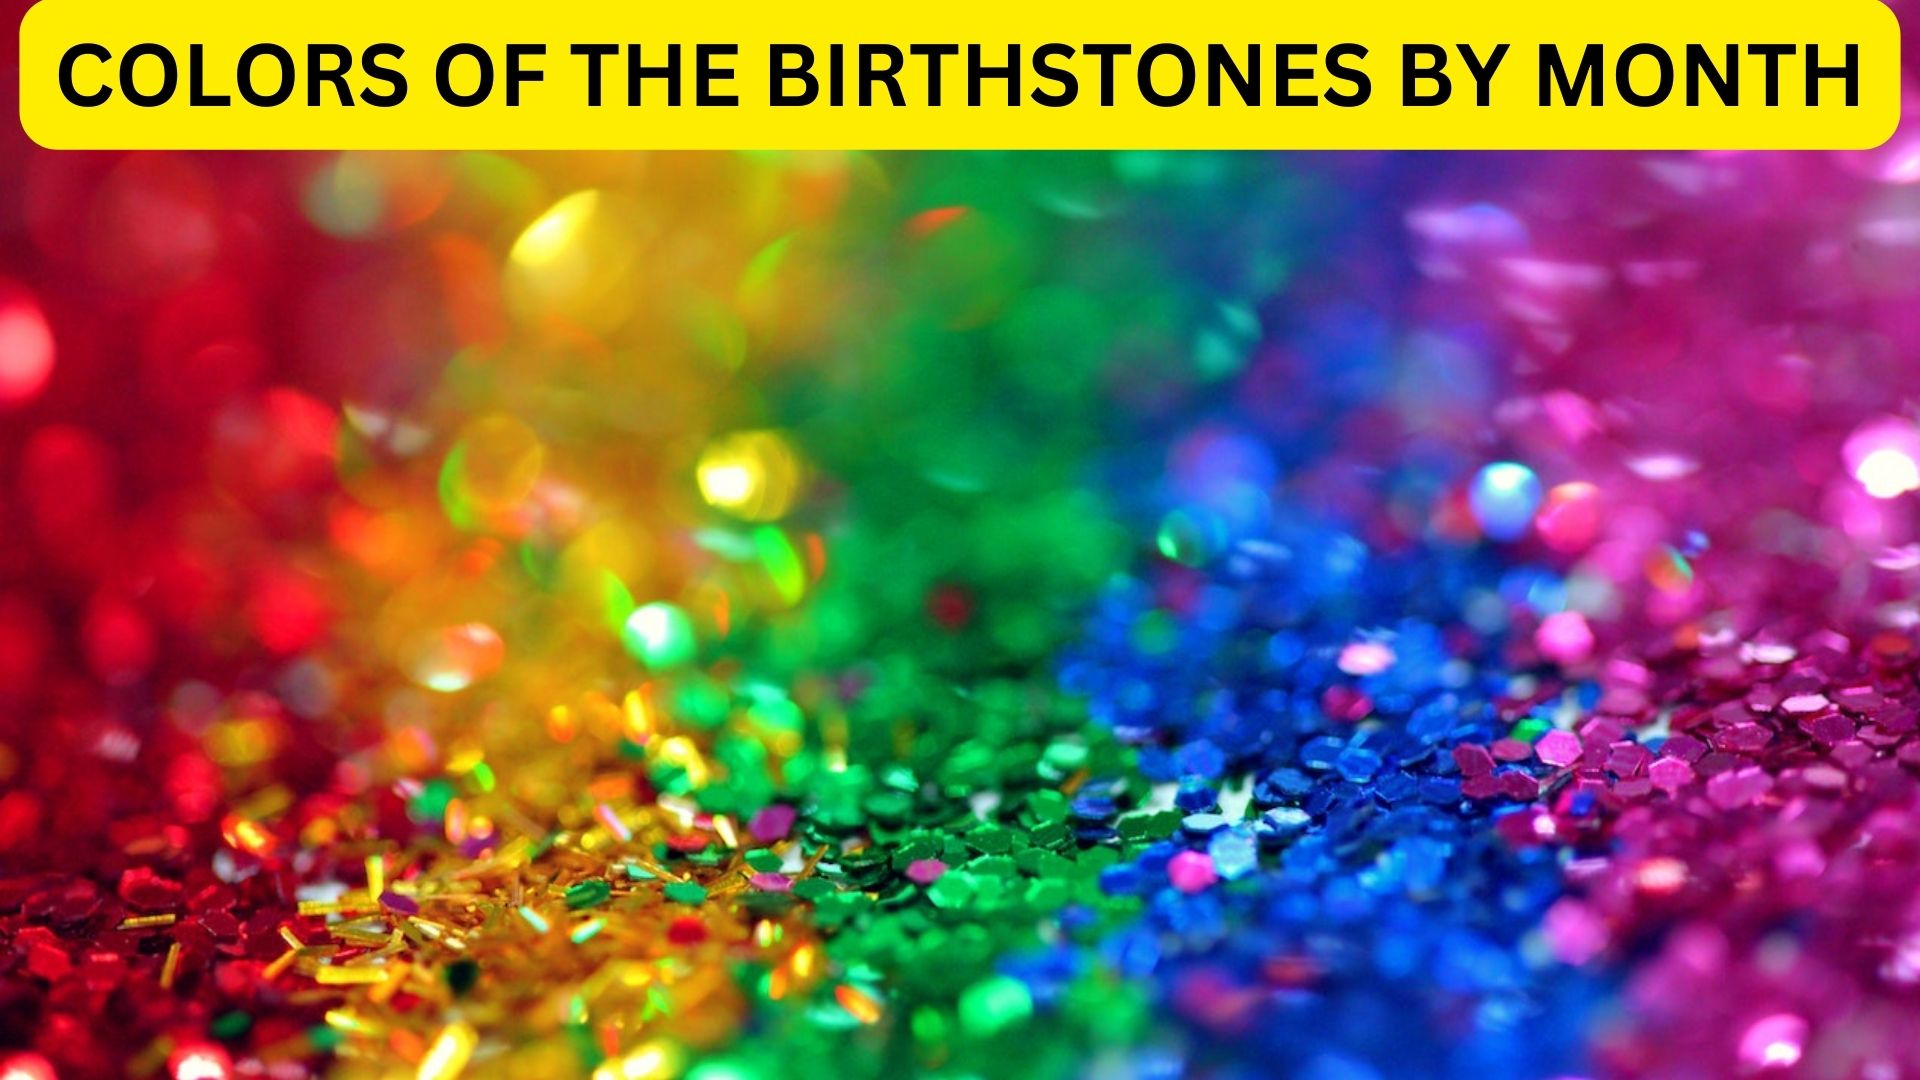 Colors Of The Birthstones By Month - The Birthstones Guide